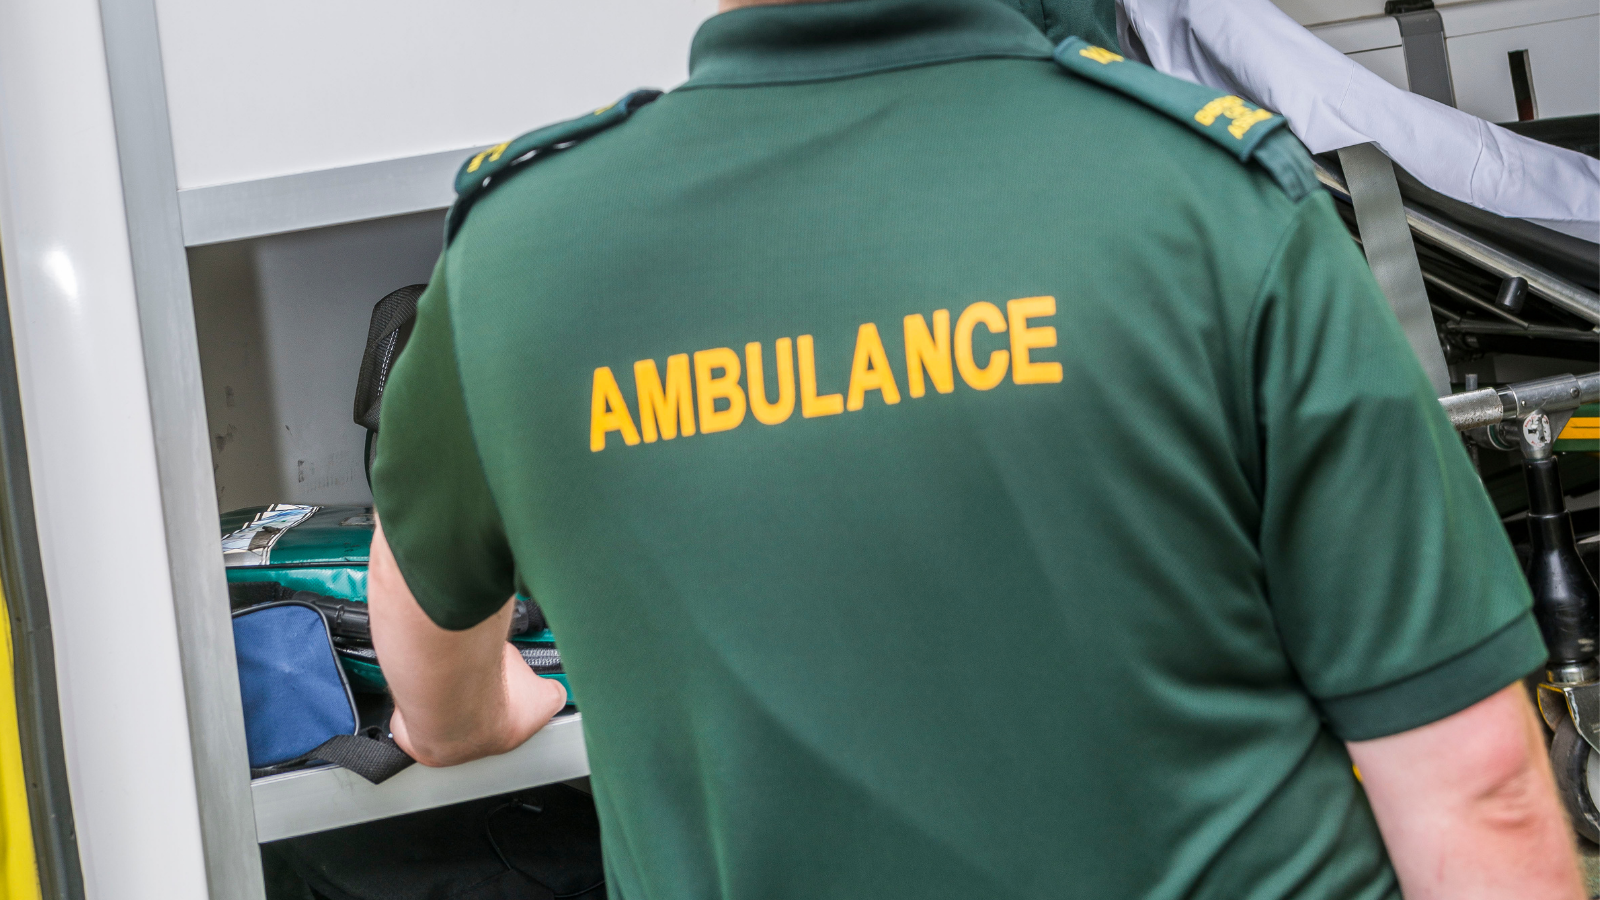 Ambulance service plea to stay safe this weekend